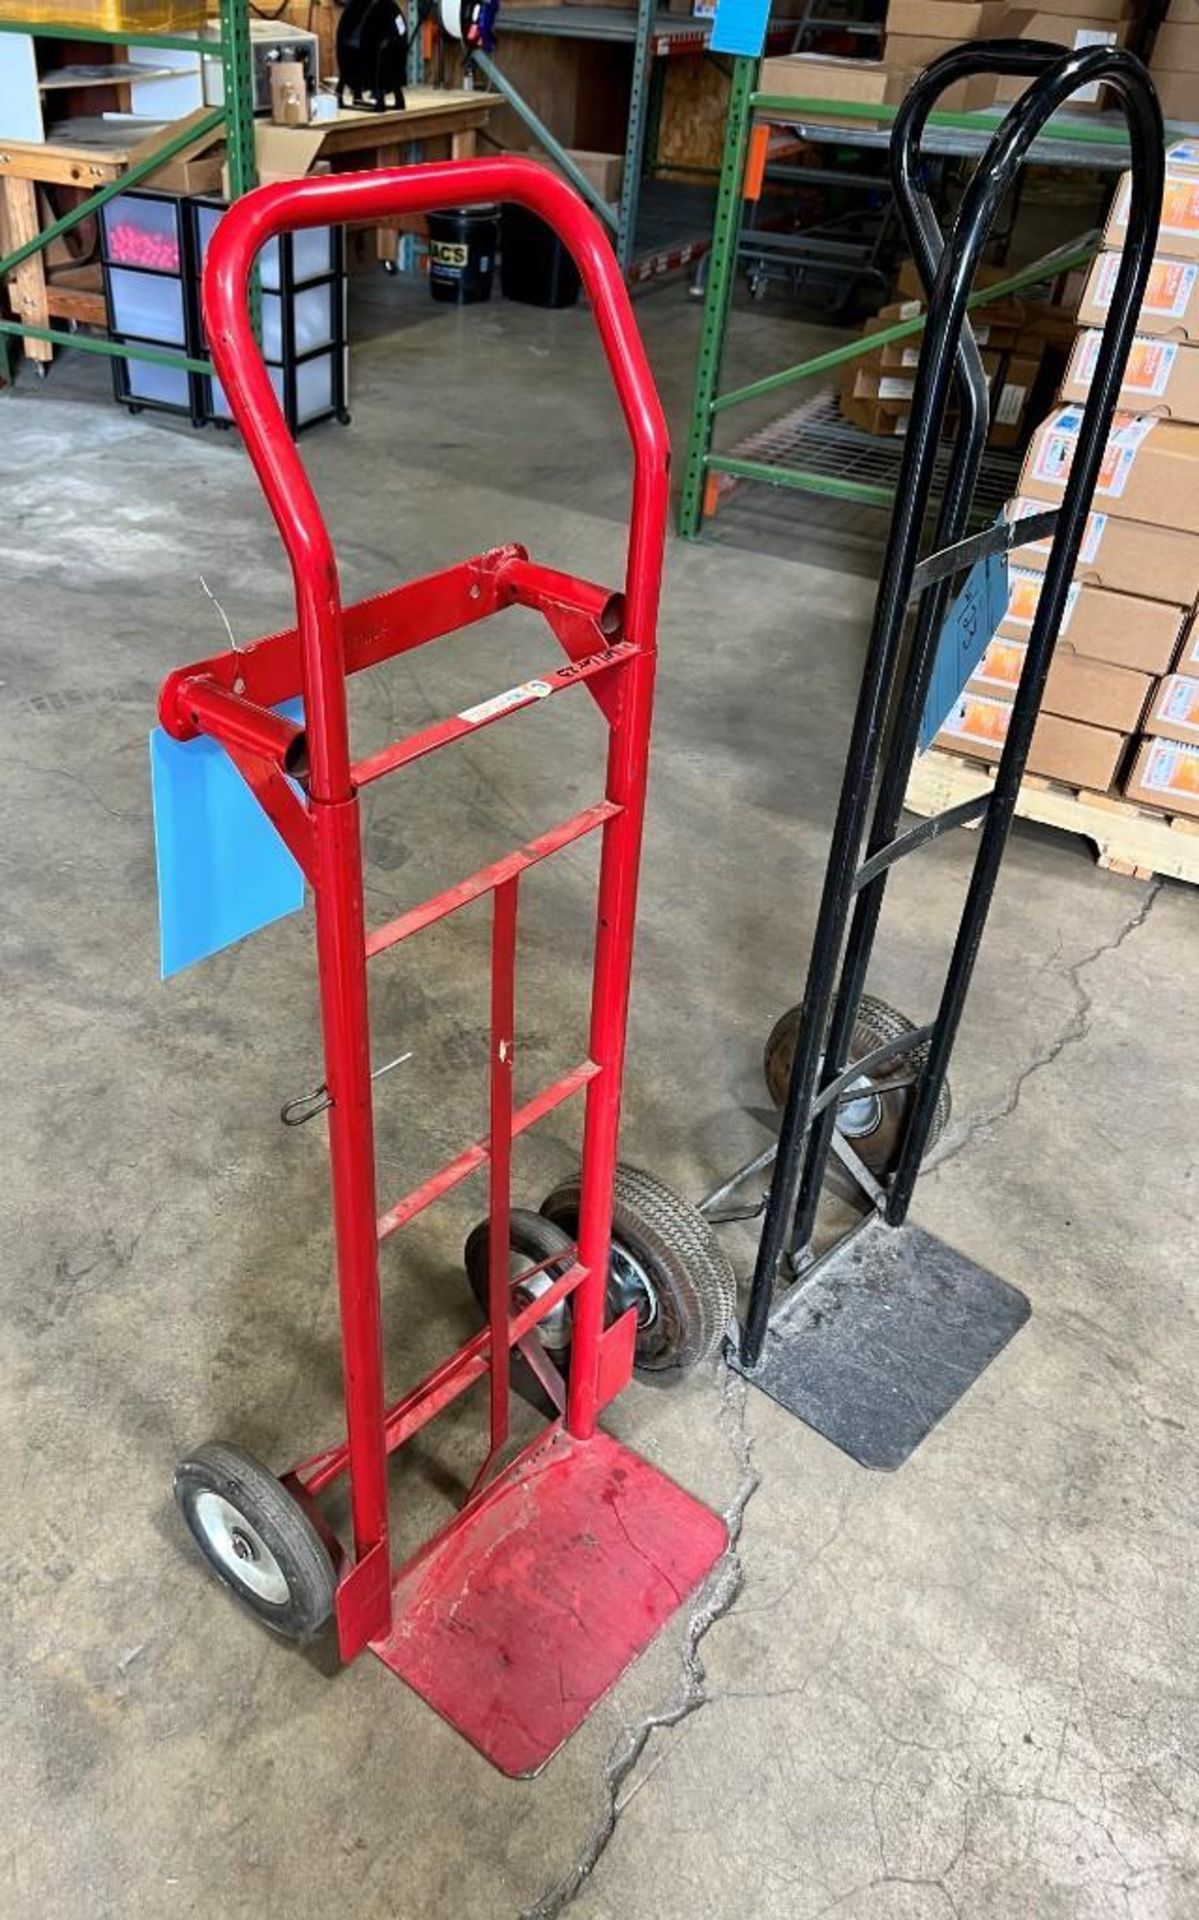 Lot Consisting Of: (1) Zowell 5500 Pound Capacity Pallet Jack, Model DF25, Serial# 14122427-2/131, B - Image 8 of 8